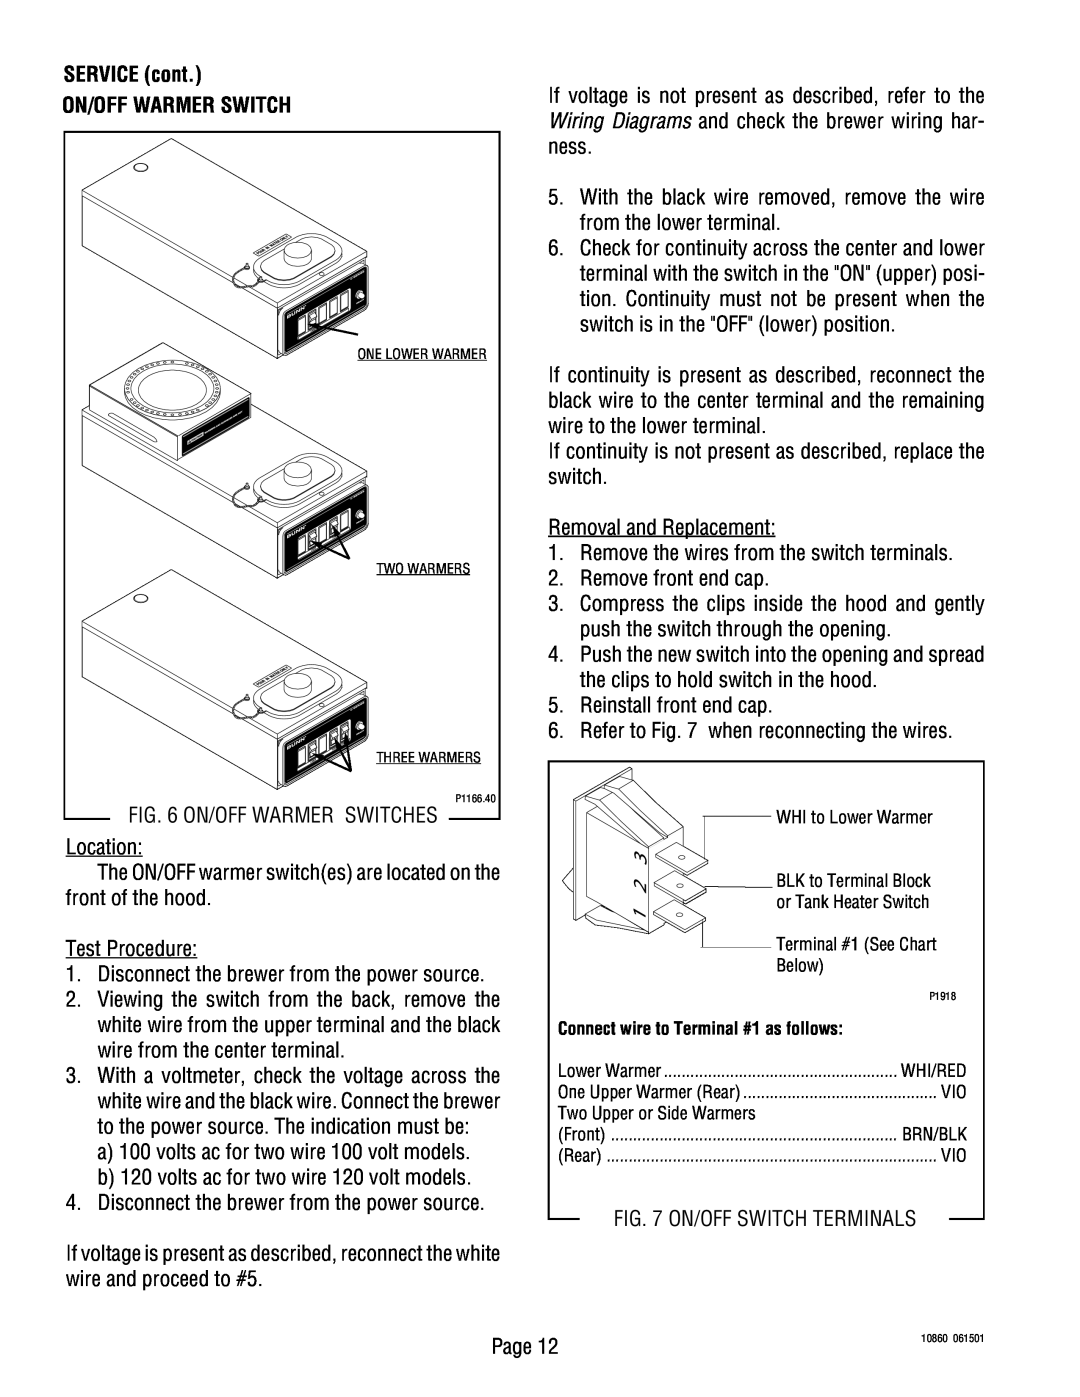 Bunn VP17B service manual SERVICE cont ON/OFF WARMER SWITCH, Connect wire to Terminal #1 as follows 